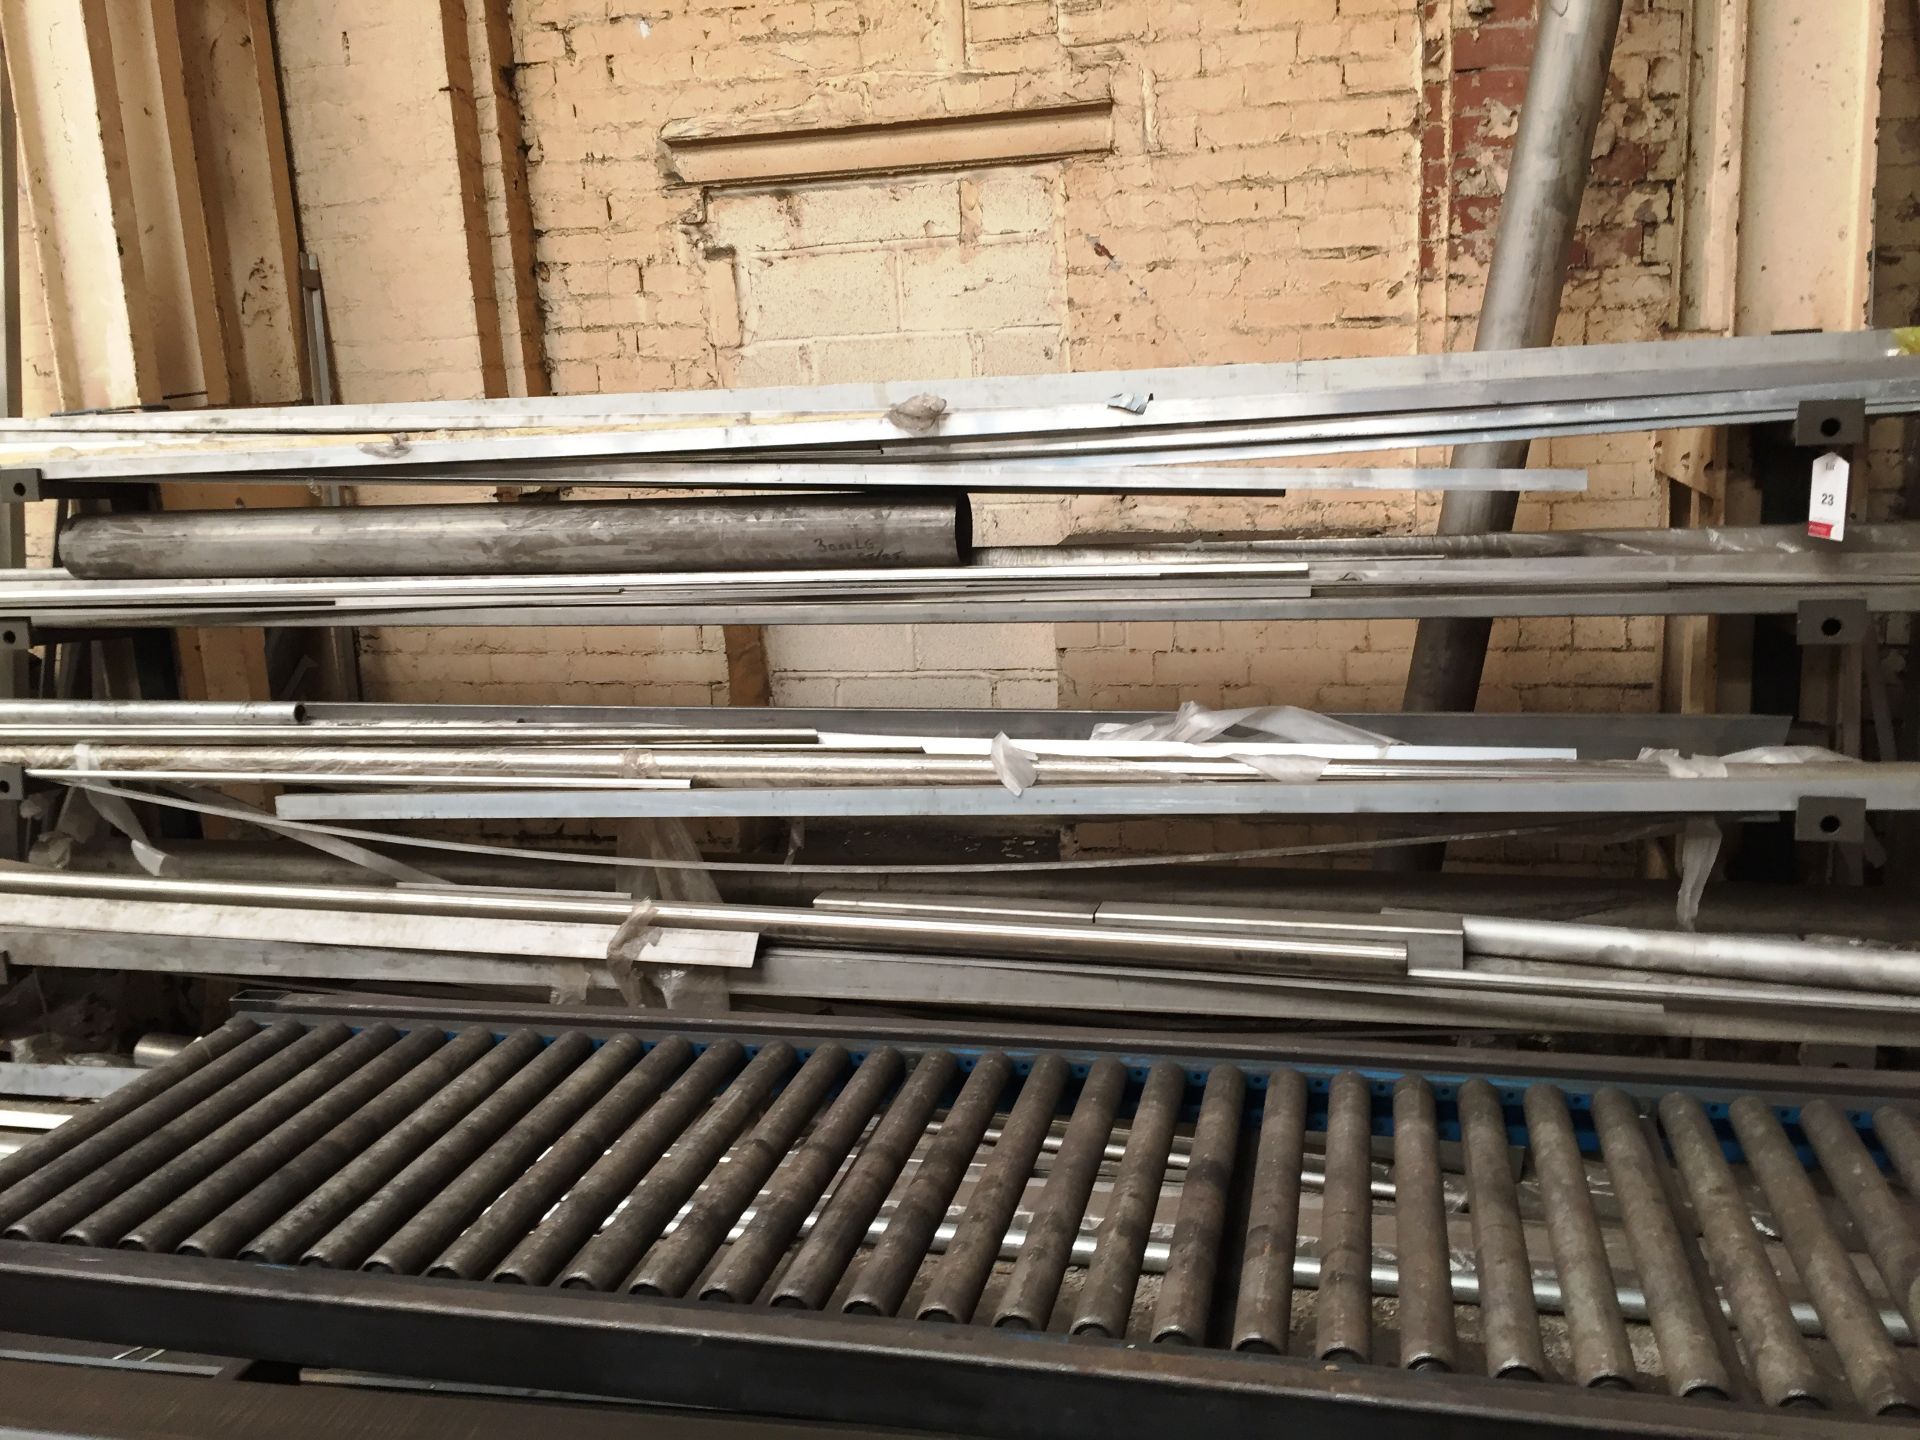 Rack containing stainless steel aluminium round and flat bar